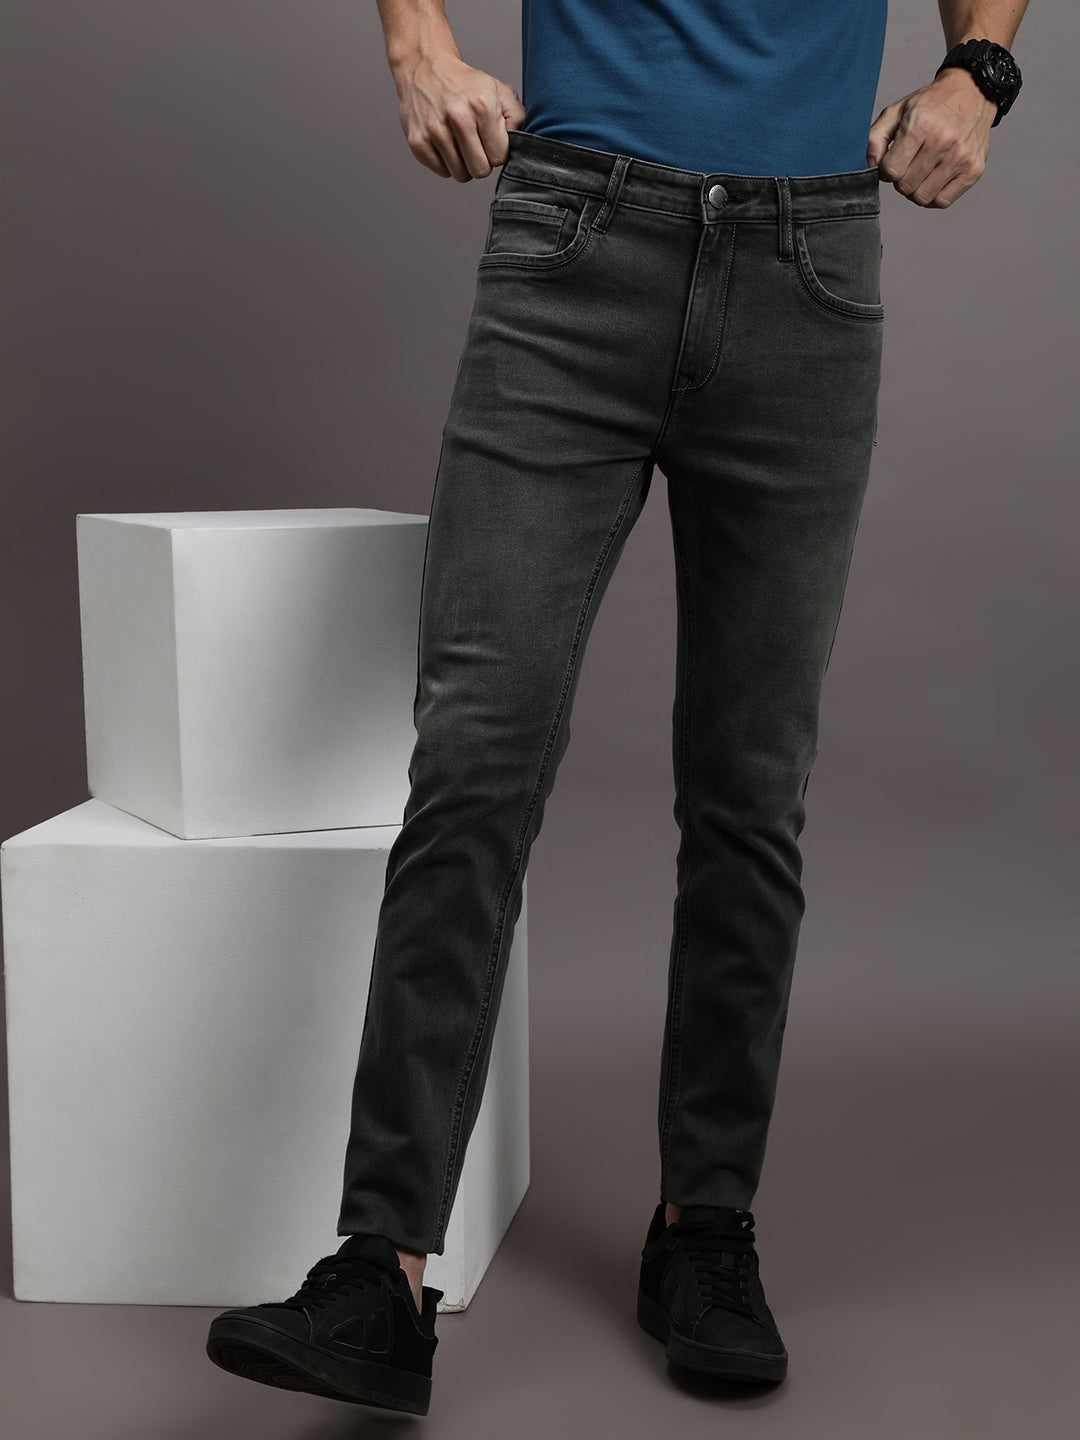 PREMIUM SUSTAINABLE WASHED BLACK JEANS